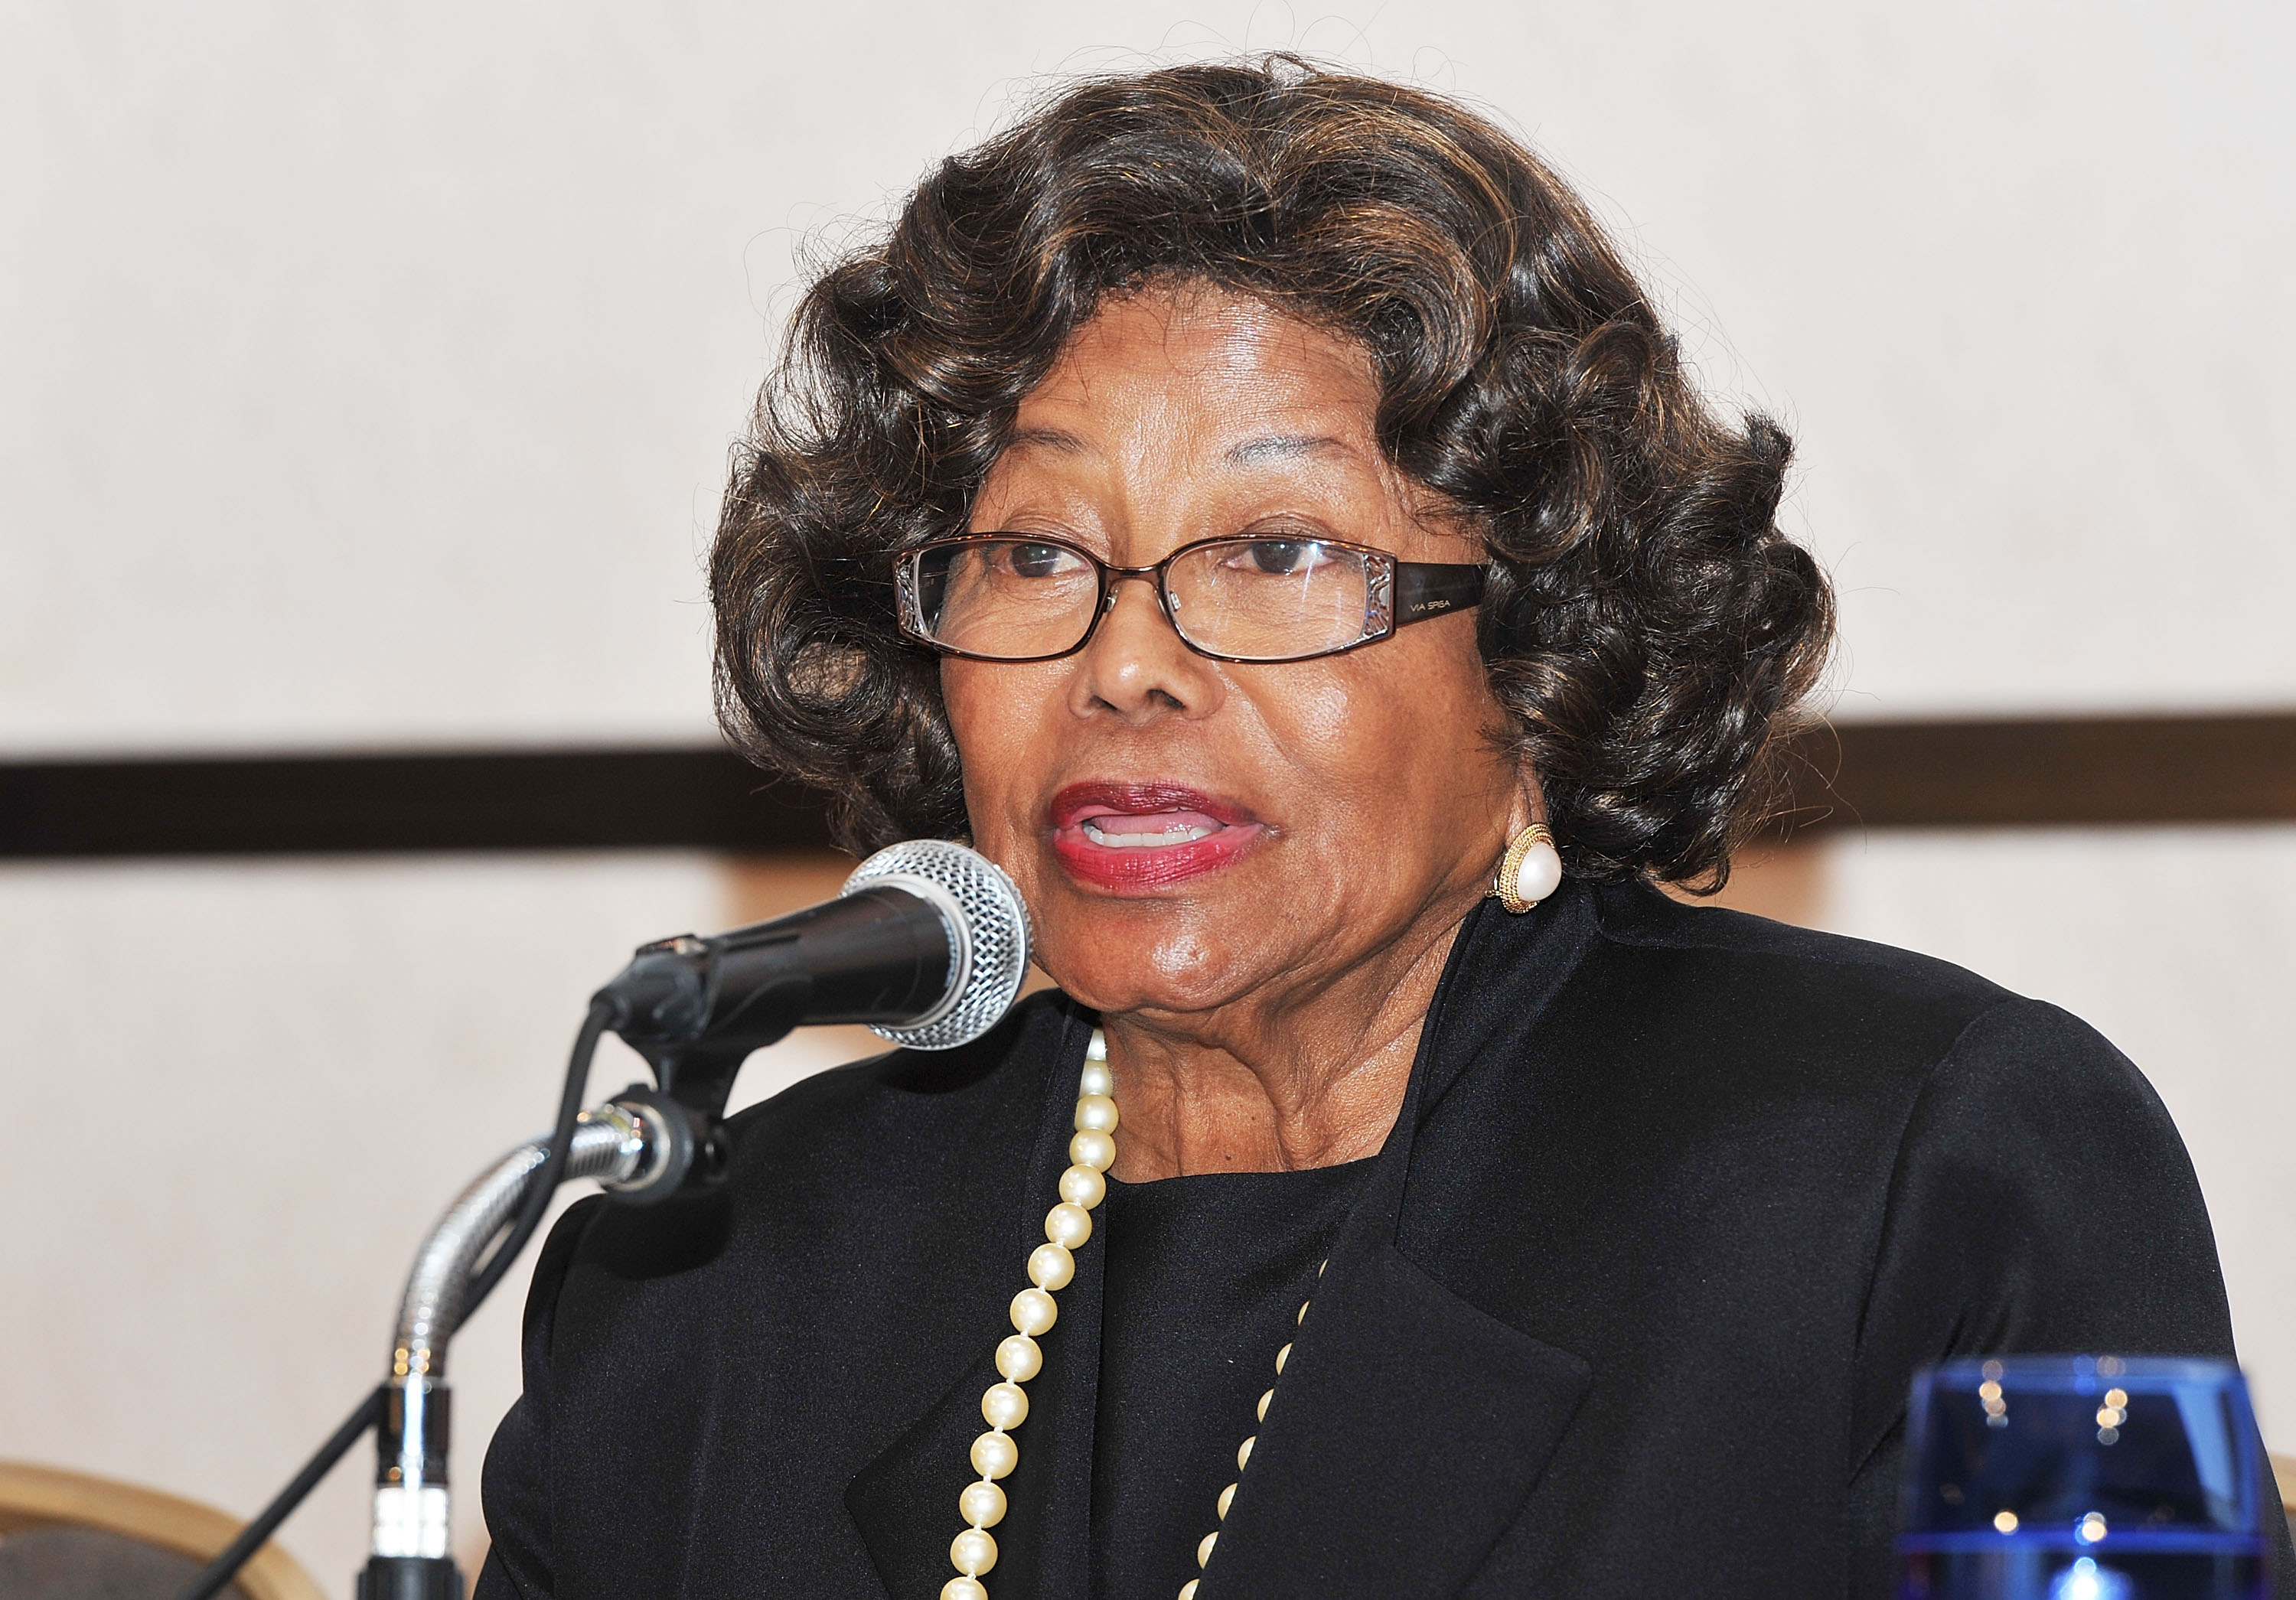 Katherine Jackson attends the press conference of "Michael Jackson Children Foundation" at the Keio Plaza Hotel on December 12, 2011 in Tokyo, Japan | Source: Getty Images